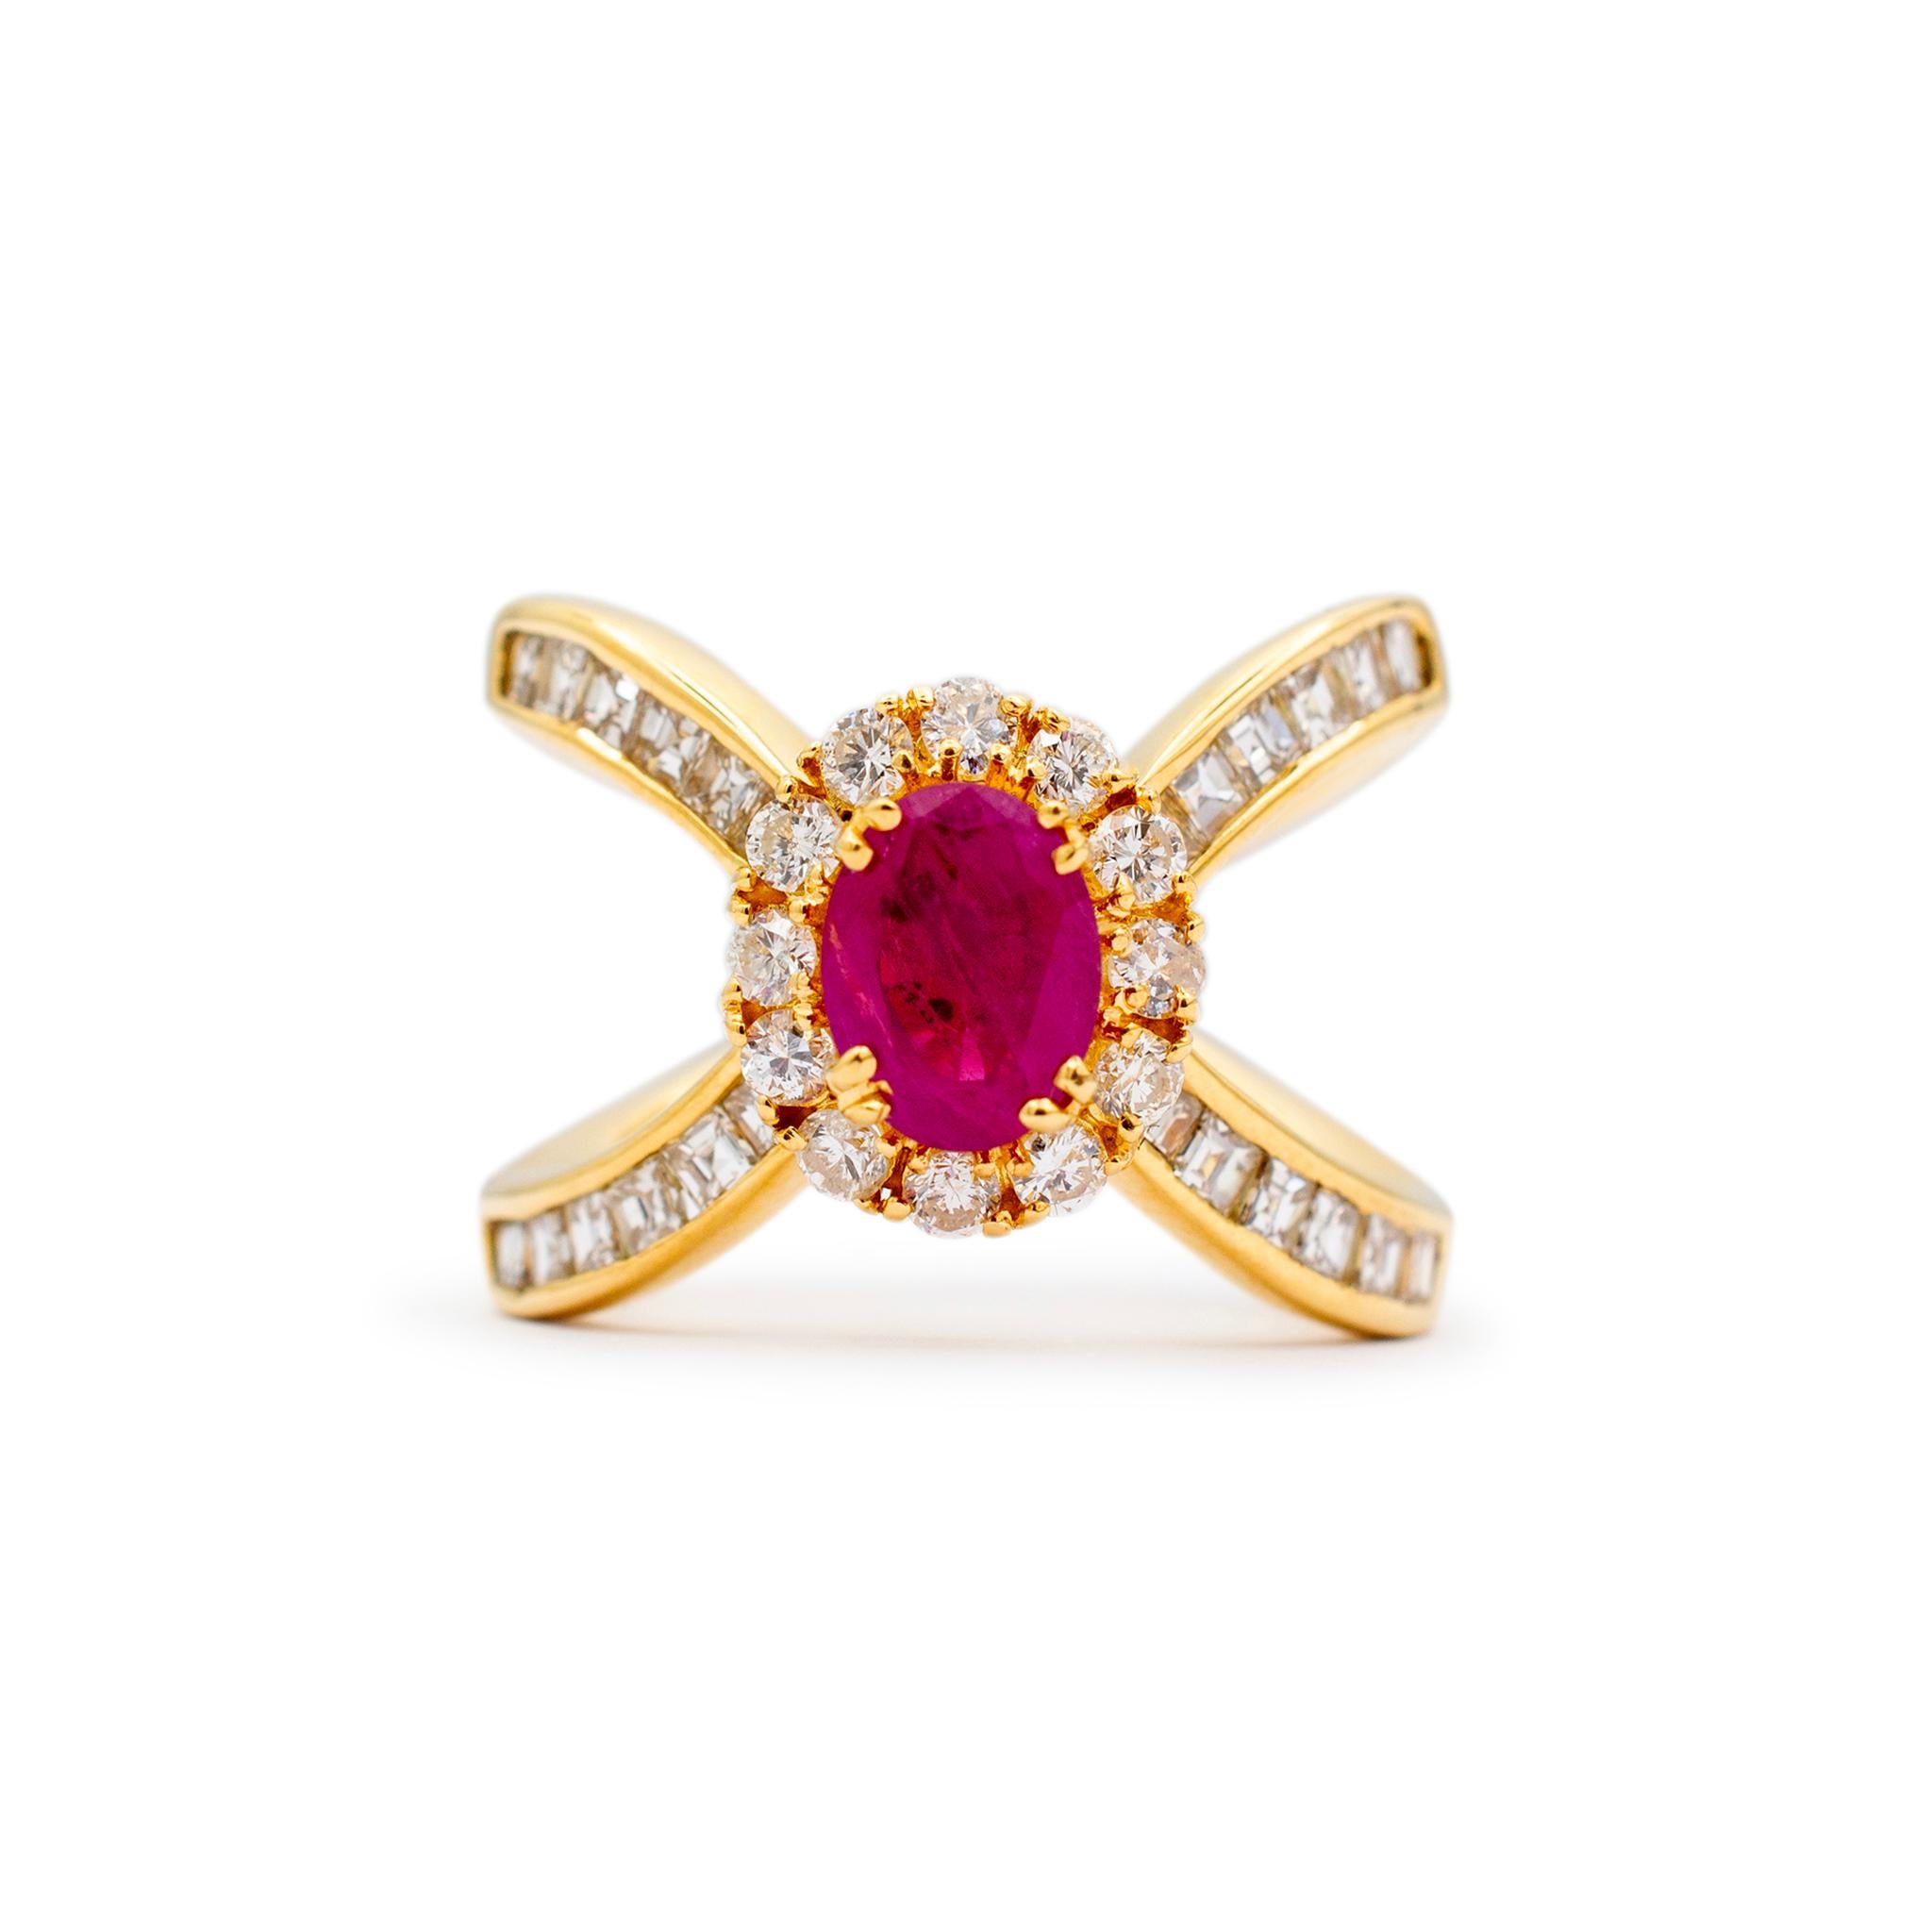 Gender: Ladies

Metal Type: 18K Yellow Gold

Size: 7

Shank Maximum Width: 17.00 mm

Head Measurement: 12.40mm x 10.50mm

Weight: 12.86 grams

Ladies 18K yellow gold diamond and ruby cocktail halo ring with a split-shank. The metal was tested and